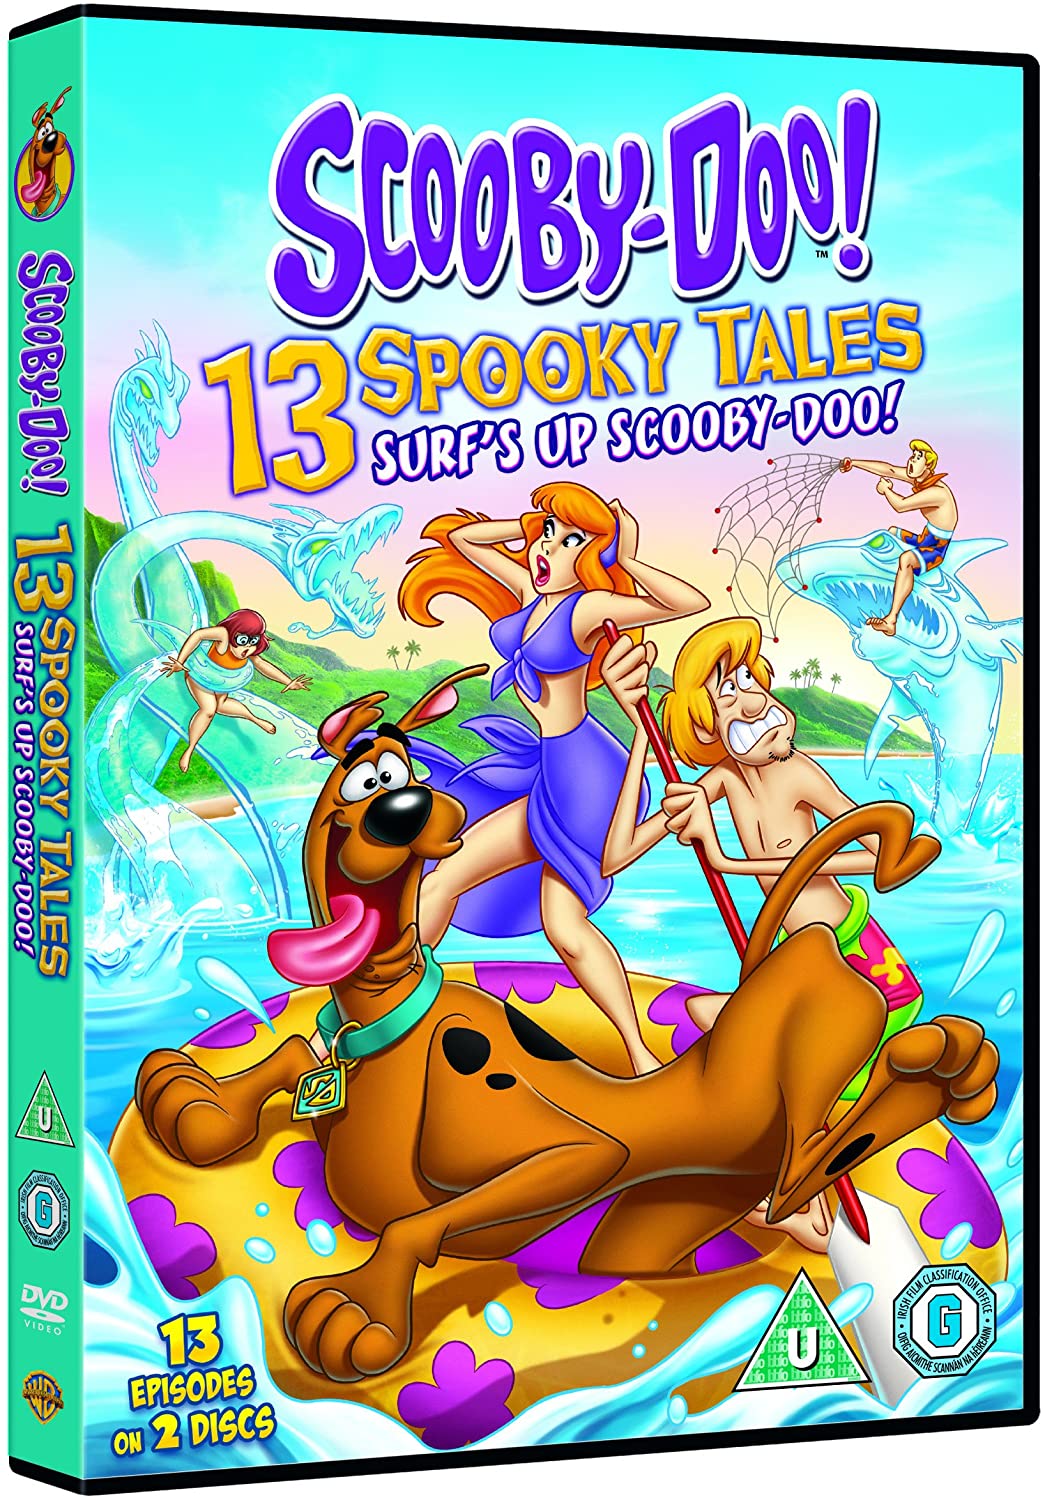 Scooby-Doo: 13 Spooky Tales: Surf's Up [2015] – Mystery [DVD]